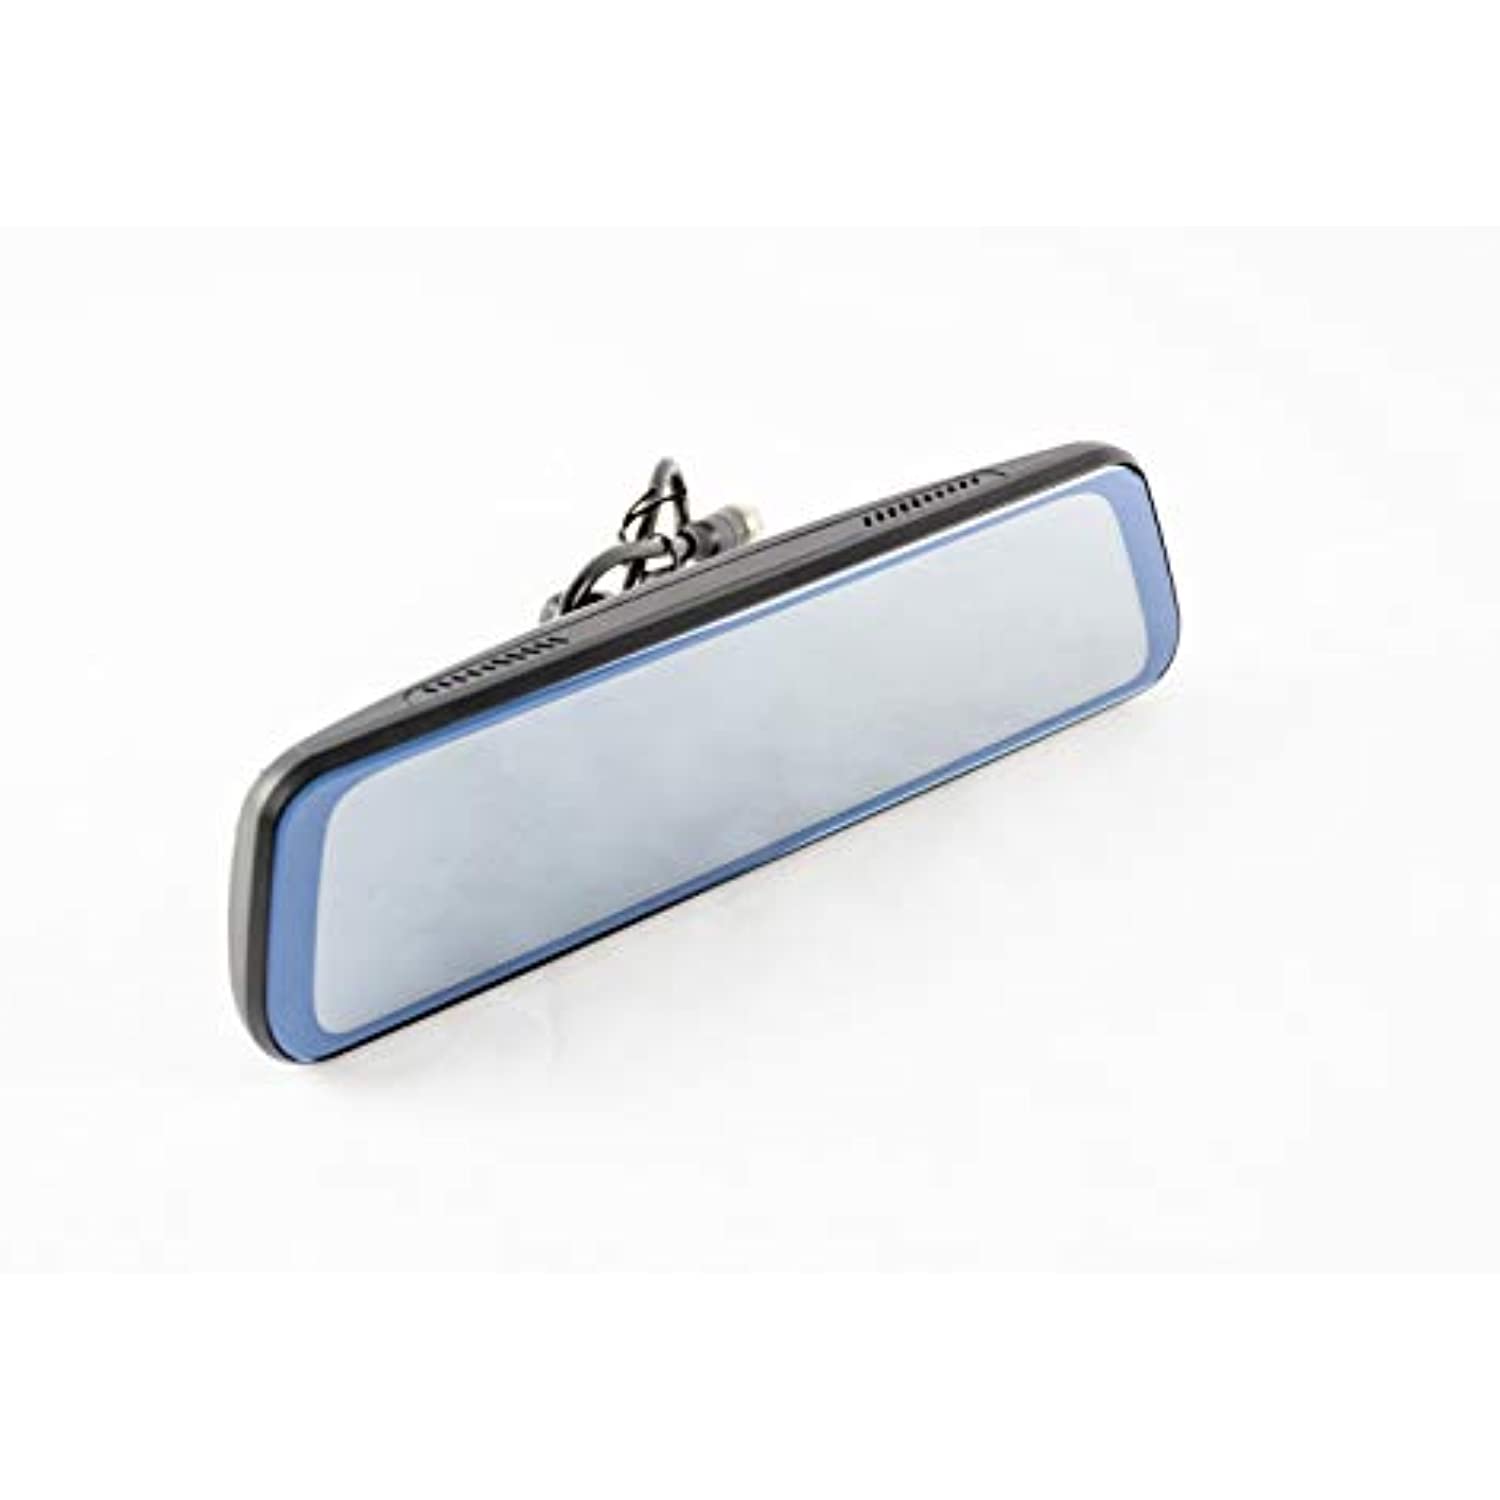 Brandmotion TRNS-2100 Transparent Trailer Rear Vision System with Ultra Wide Display Mirror